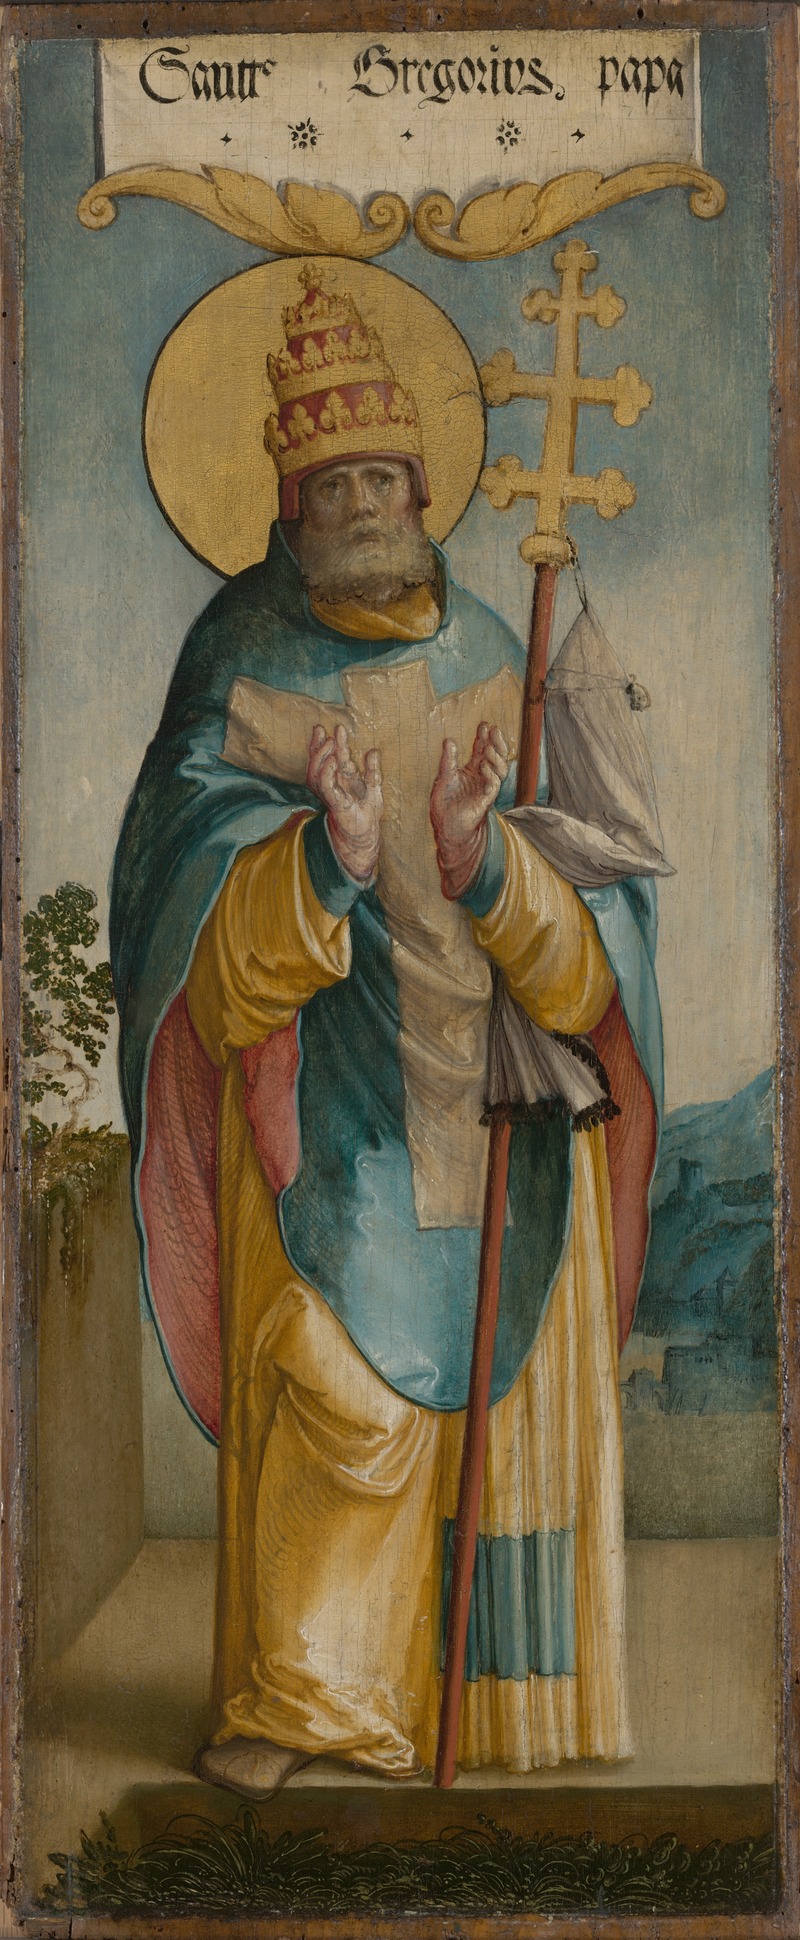 Peter Strüb the Younger (Master of Messkirch) - Saint Gregory the Great